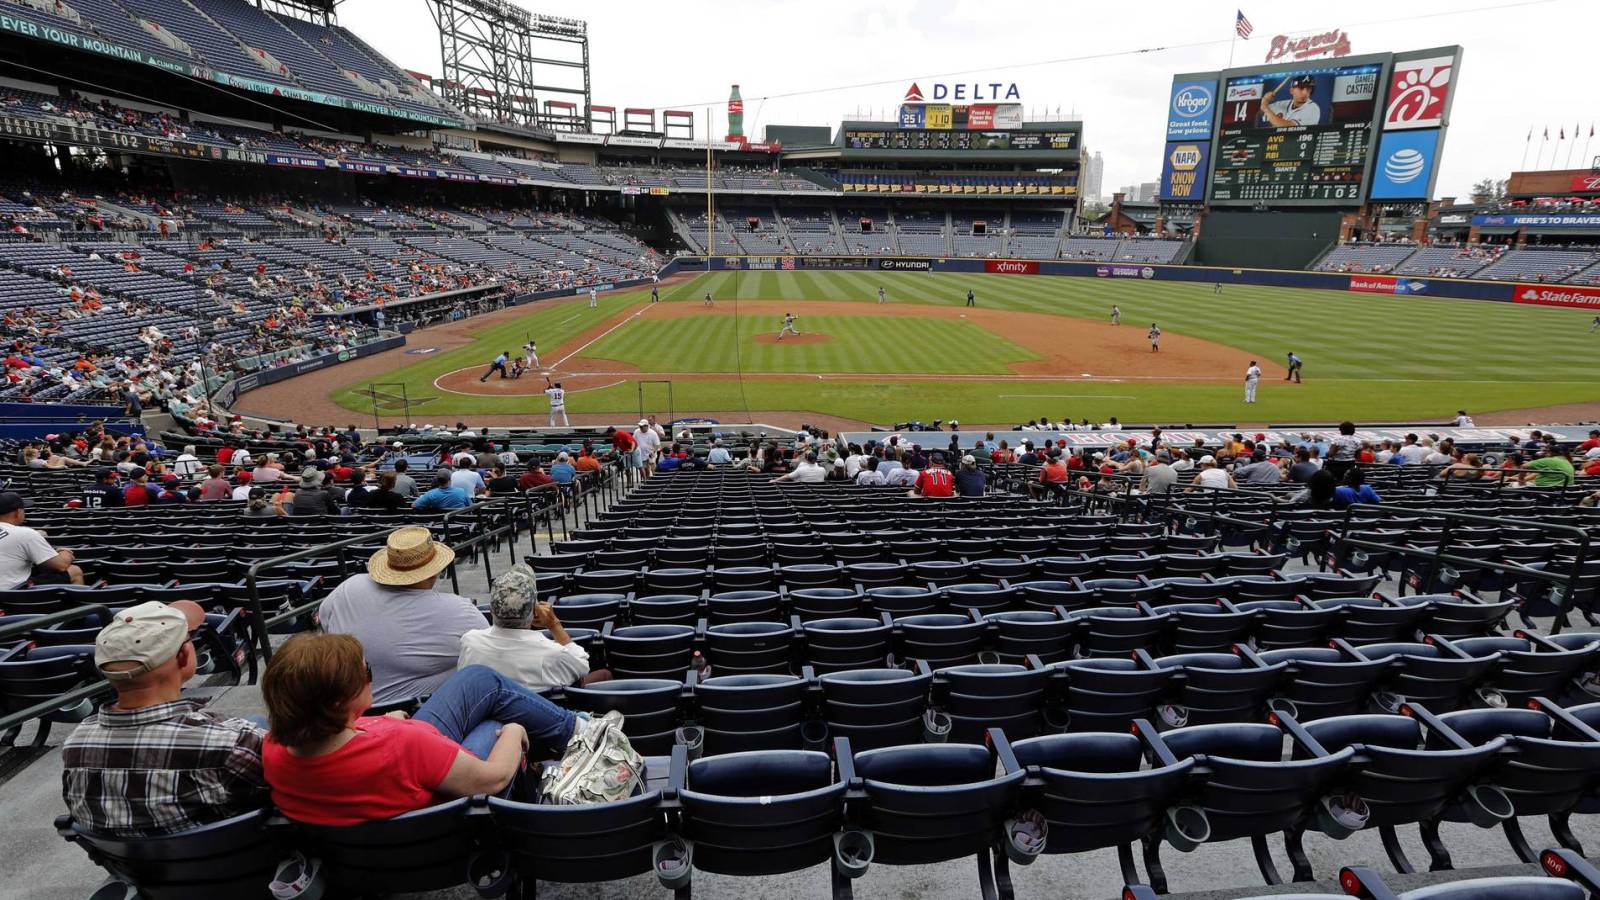 Braves fans and Cobb County businesses want MLB dispute resolved